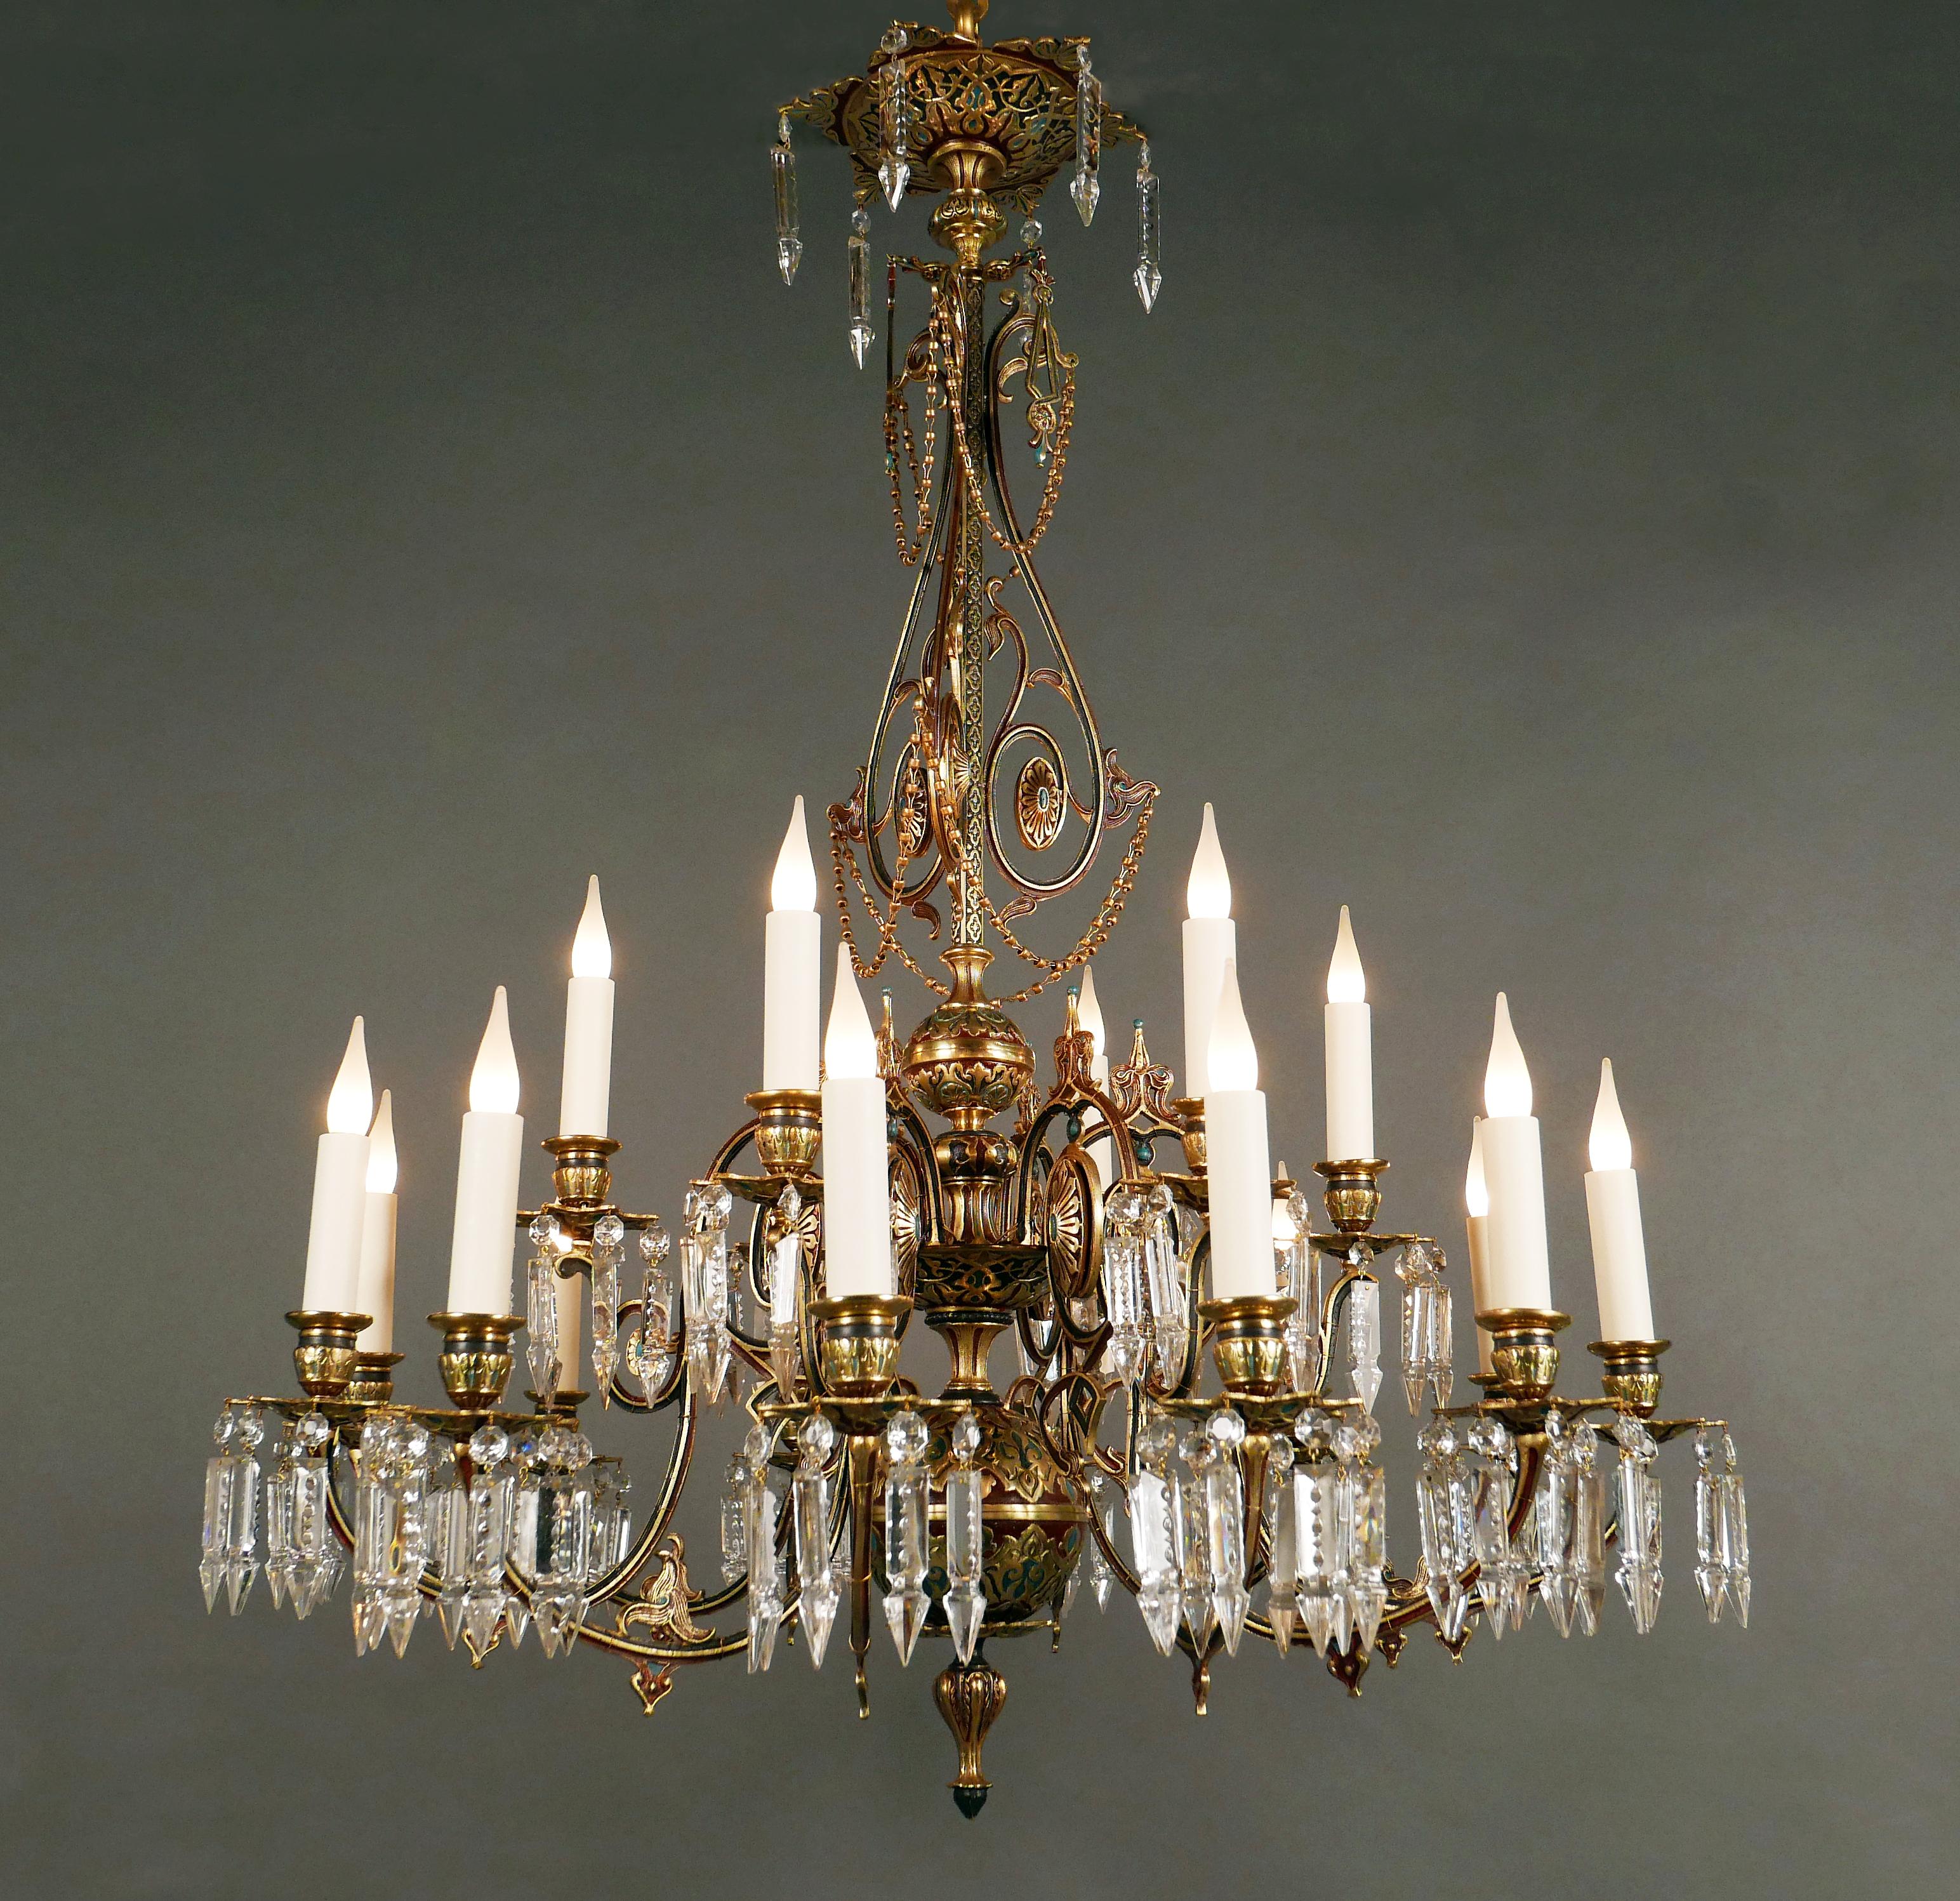 Rare chandelier in gilded and patinated bronze with eighteen lights, finely decorated with stylized oriental motifs in polychrome red and blue cold enamel. Surmounted by an elegant ceiling light, it consists of a shaft embellished with interlacing